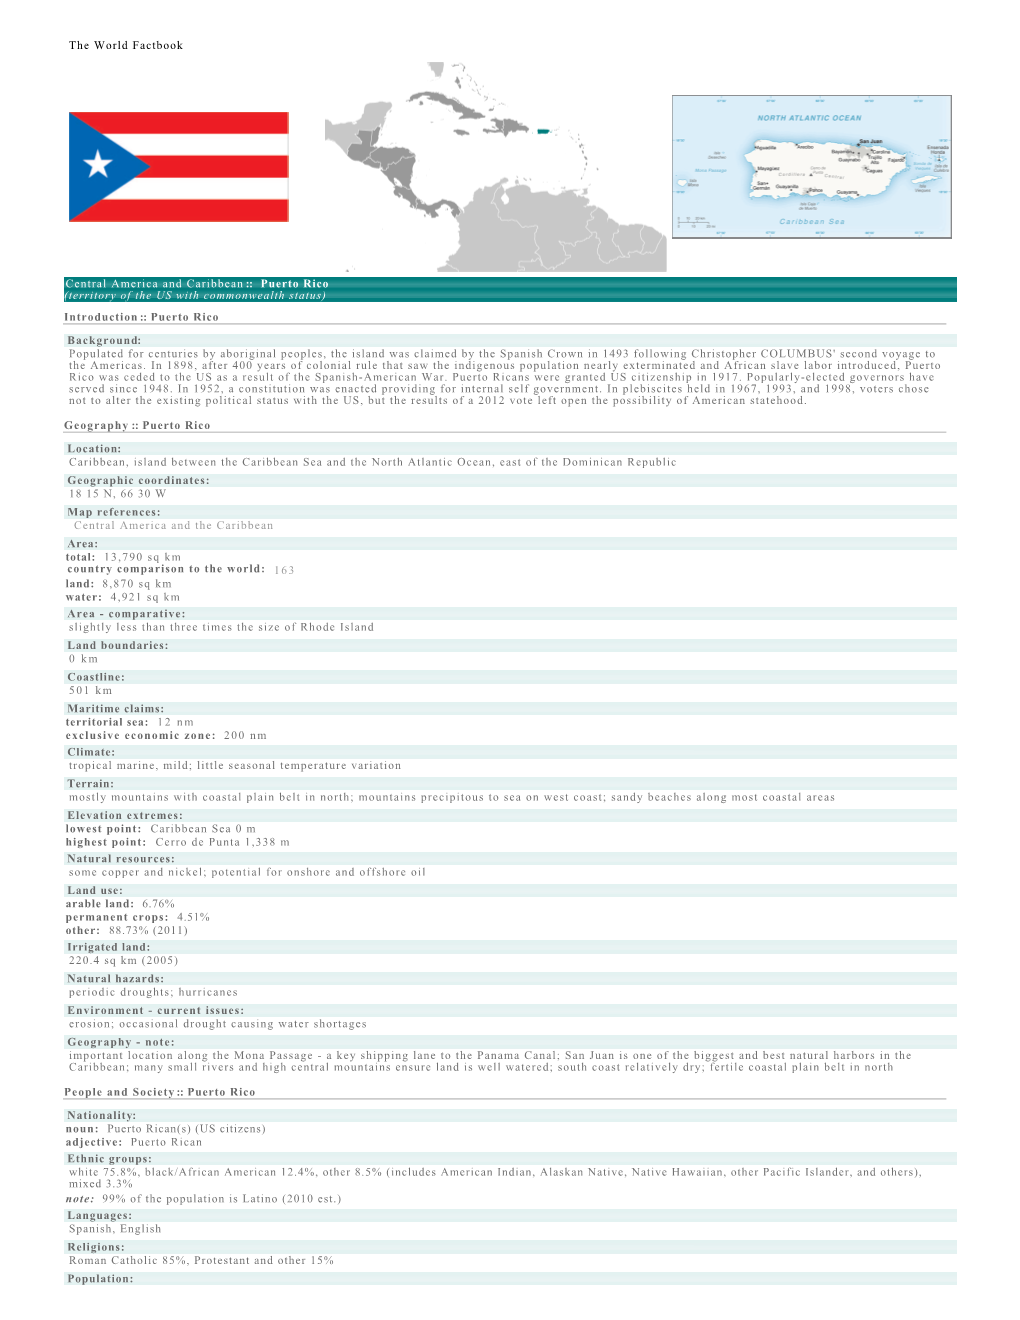 The World Factbook Central America and Caribbean :: Puerto Rico